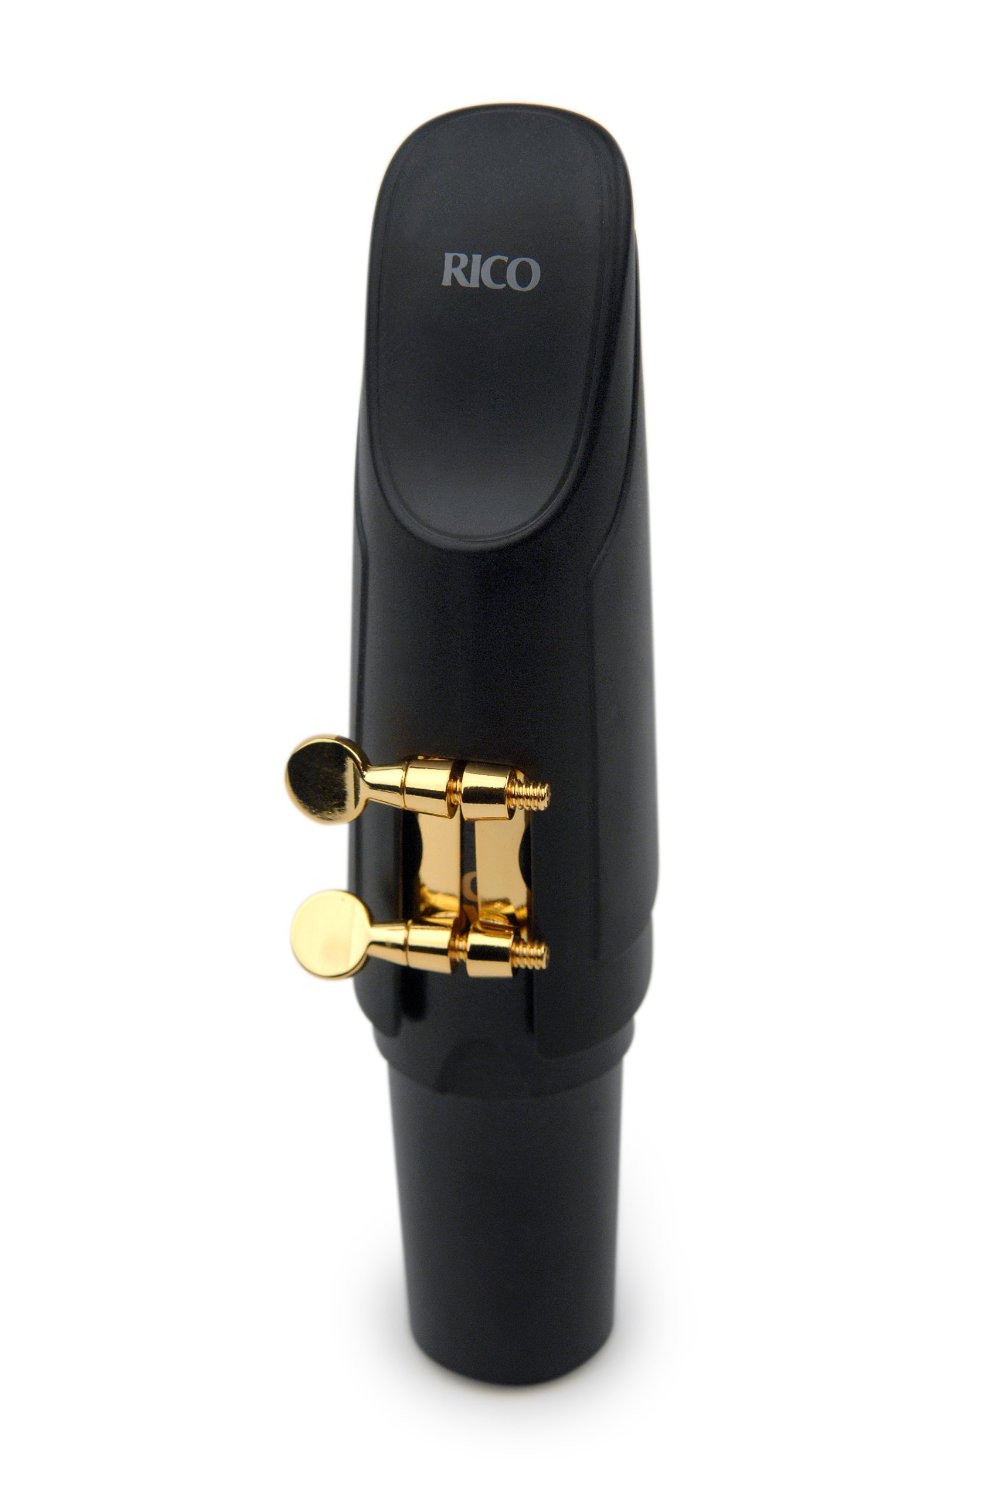 H-Ligature & Cap, Baritone Sax for Selmer-style Mouthpieces, Gold-plated